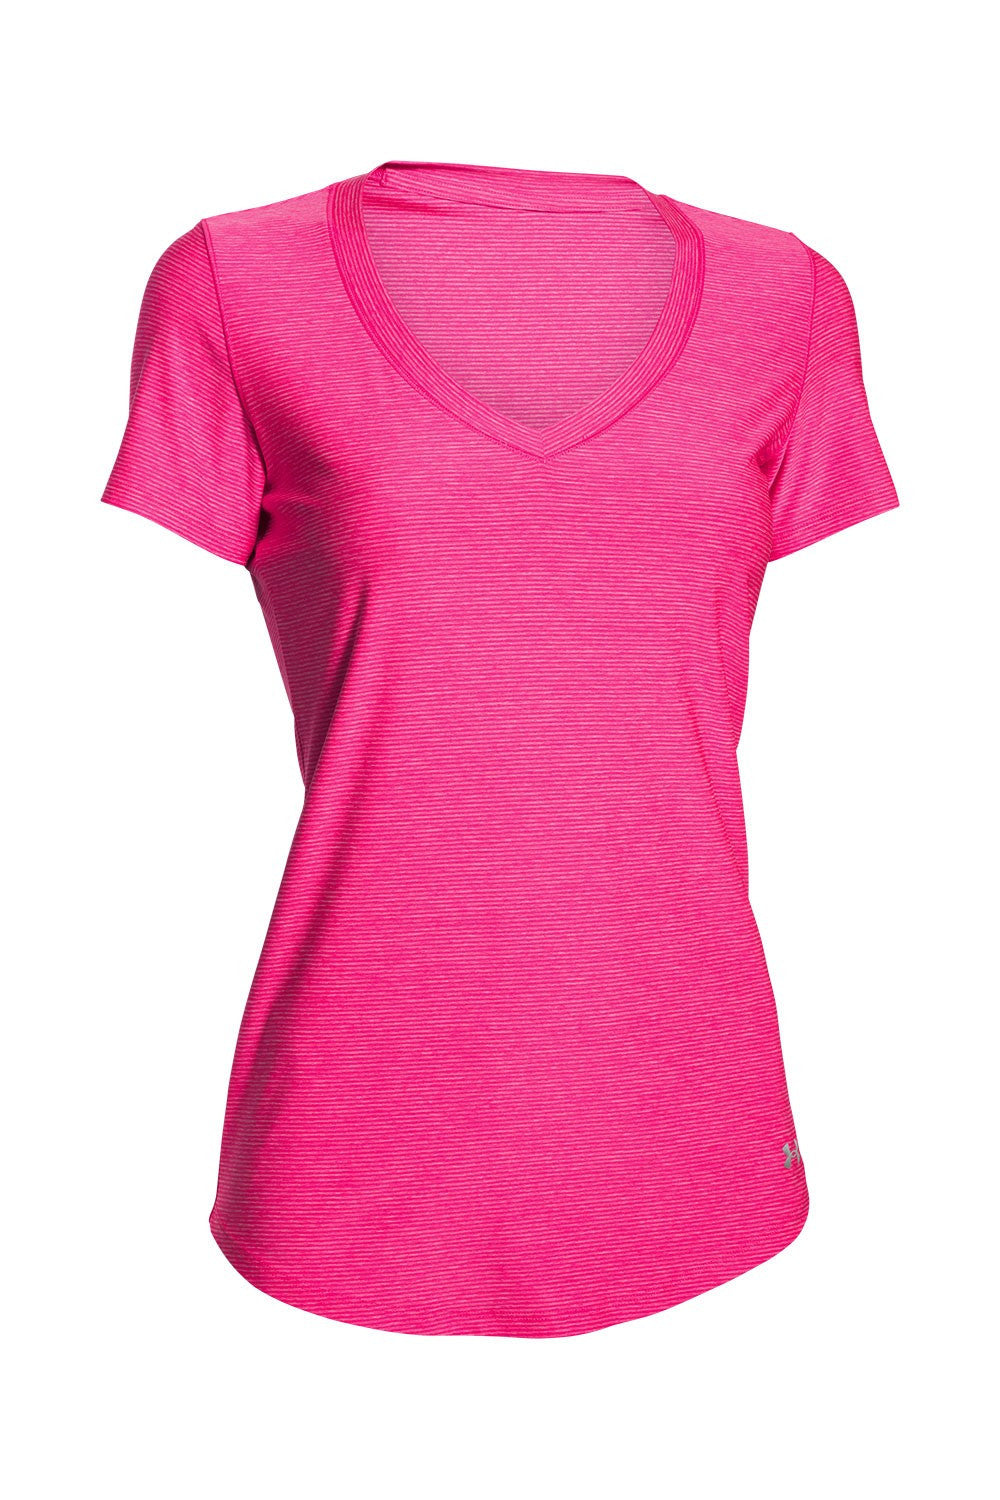 Under Armour Women\'s Perfect Pace T Rebel Pink 1254026-652 – Mann Sports  Outlet | Sporttops